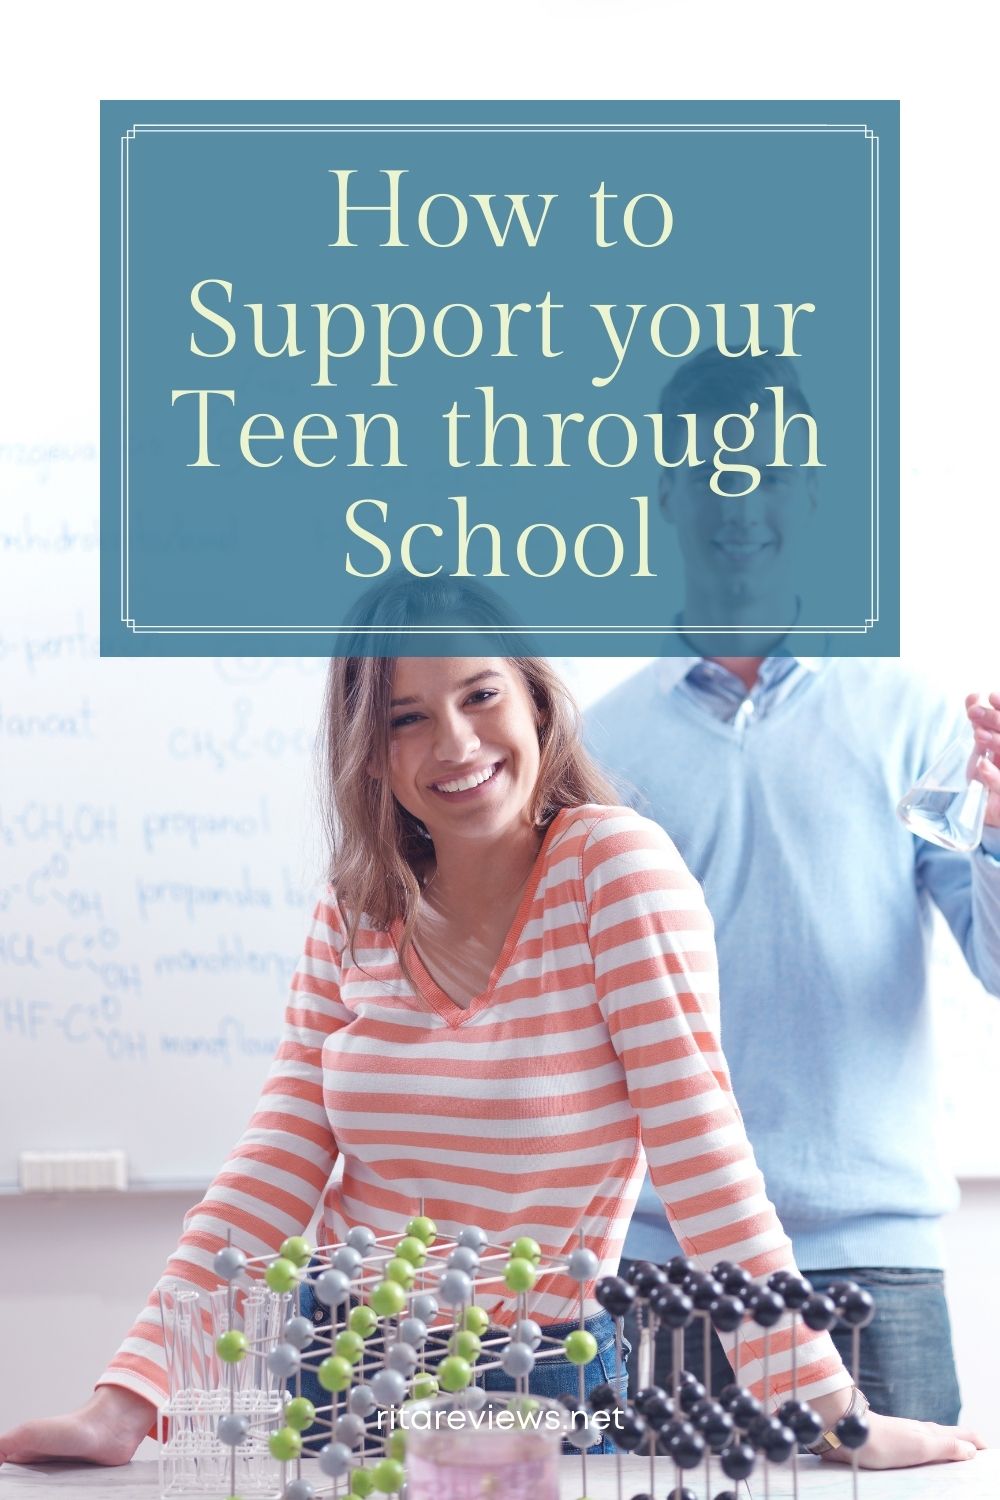 How to Support your Teen through School